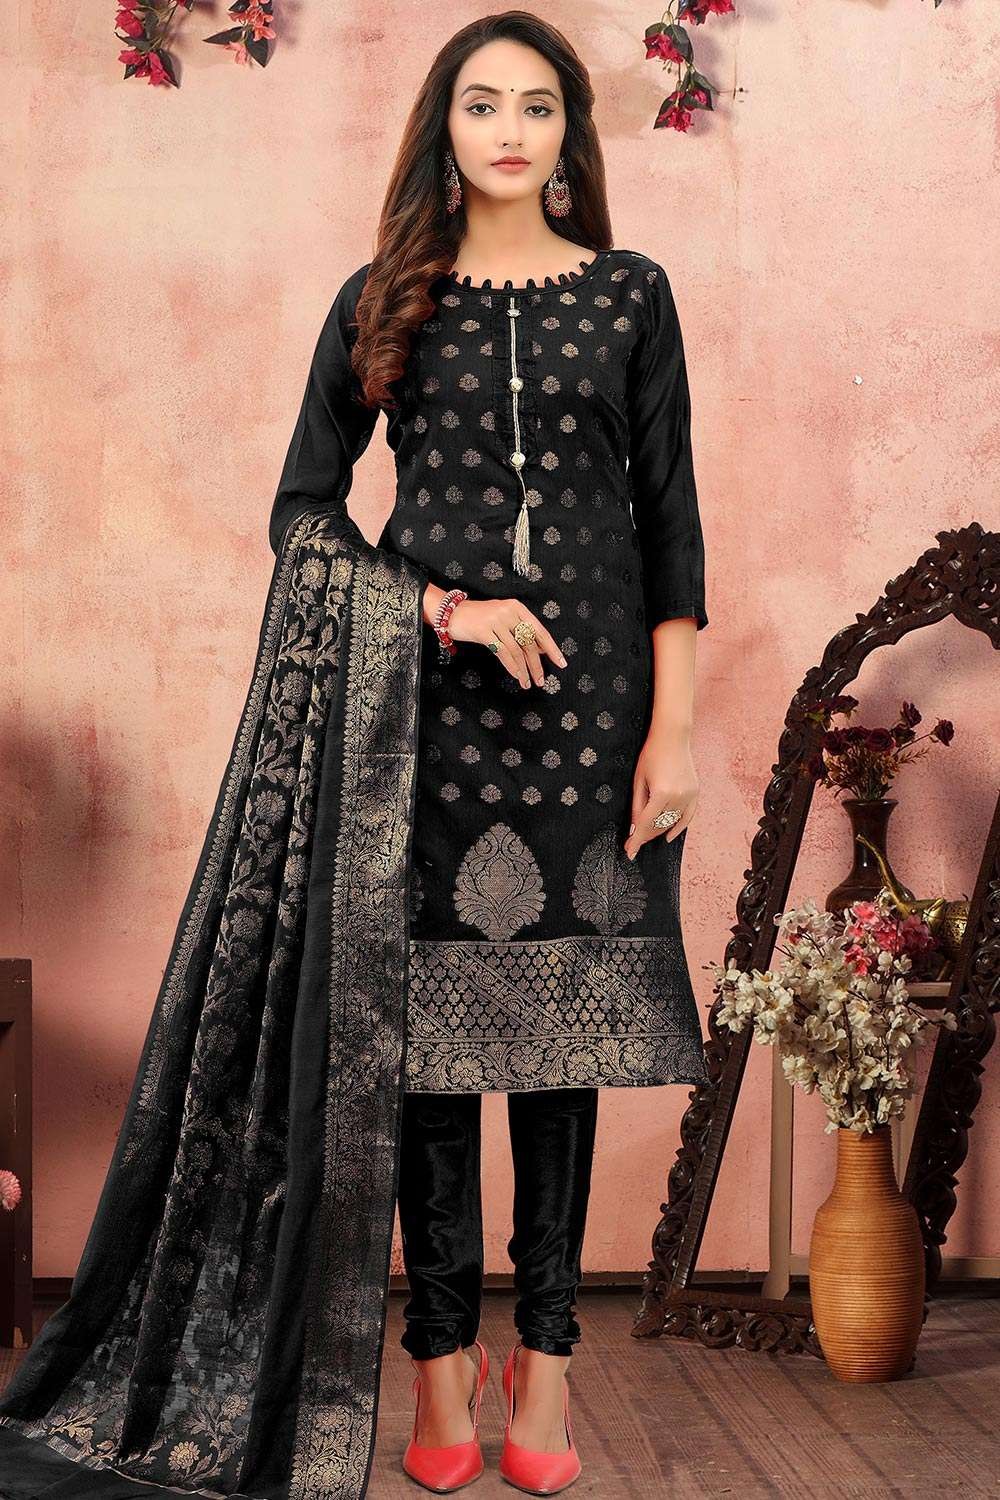 Black Salwar Suit with Gold Lace Border | Punjabi salwar suits, Black  salwar suit, Simple indian suits